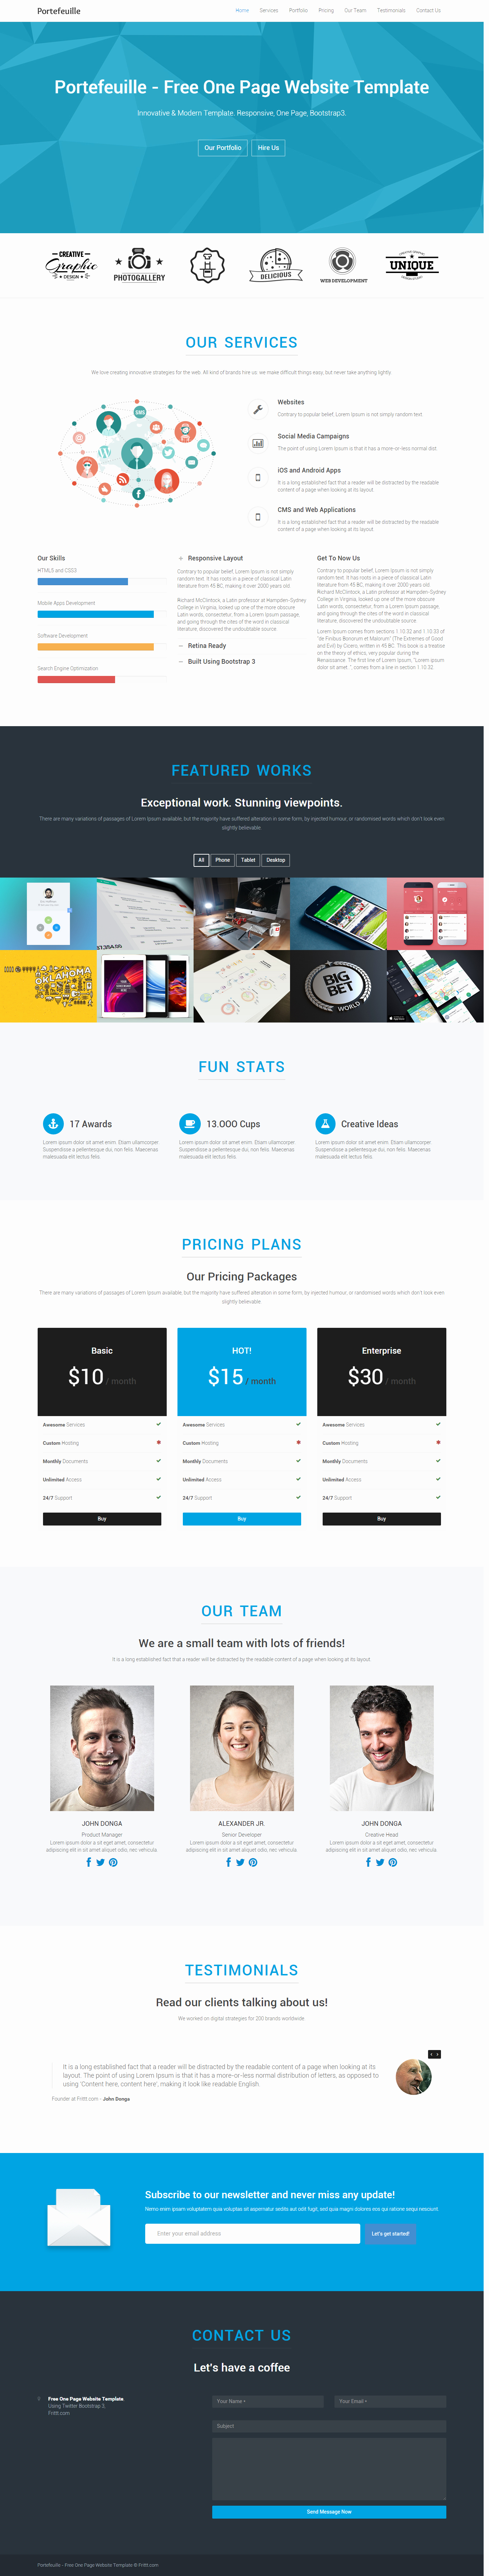 E Page Website Template